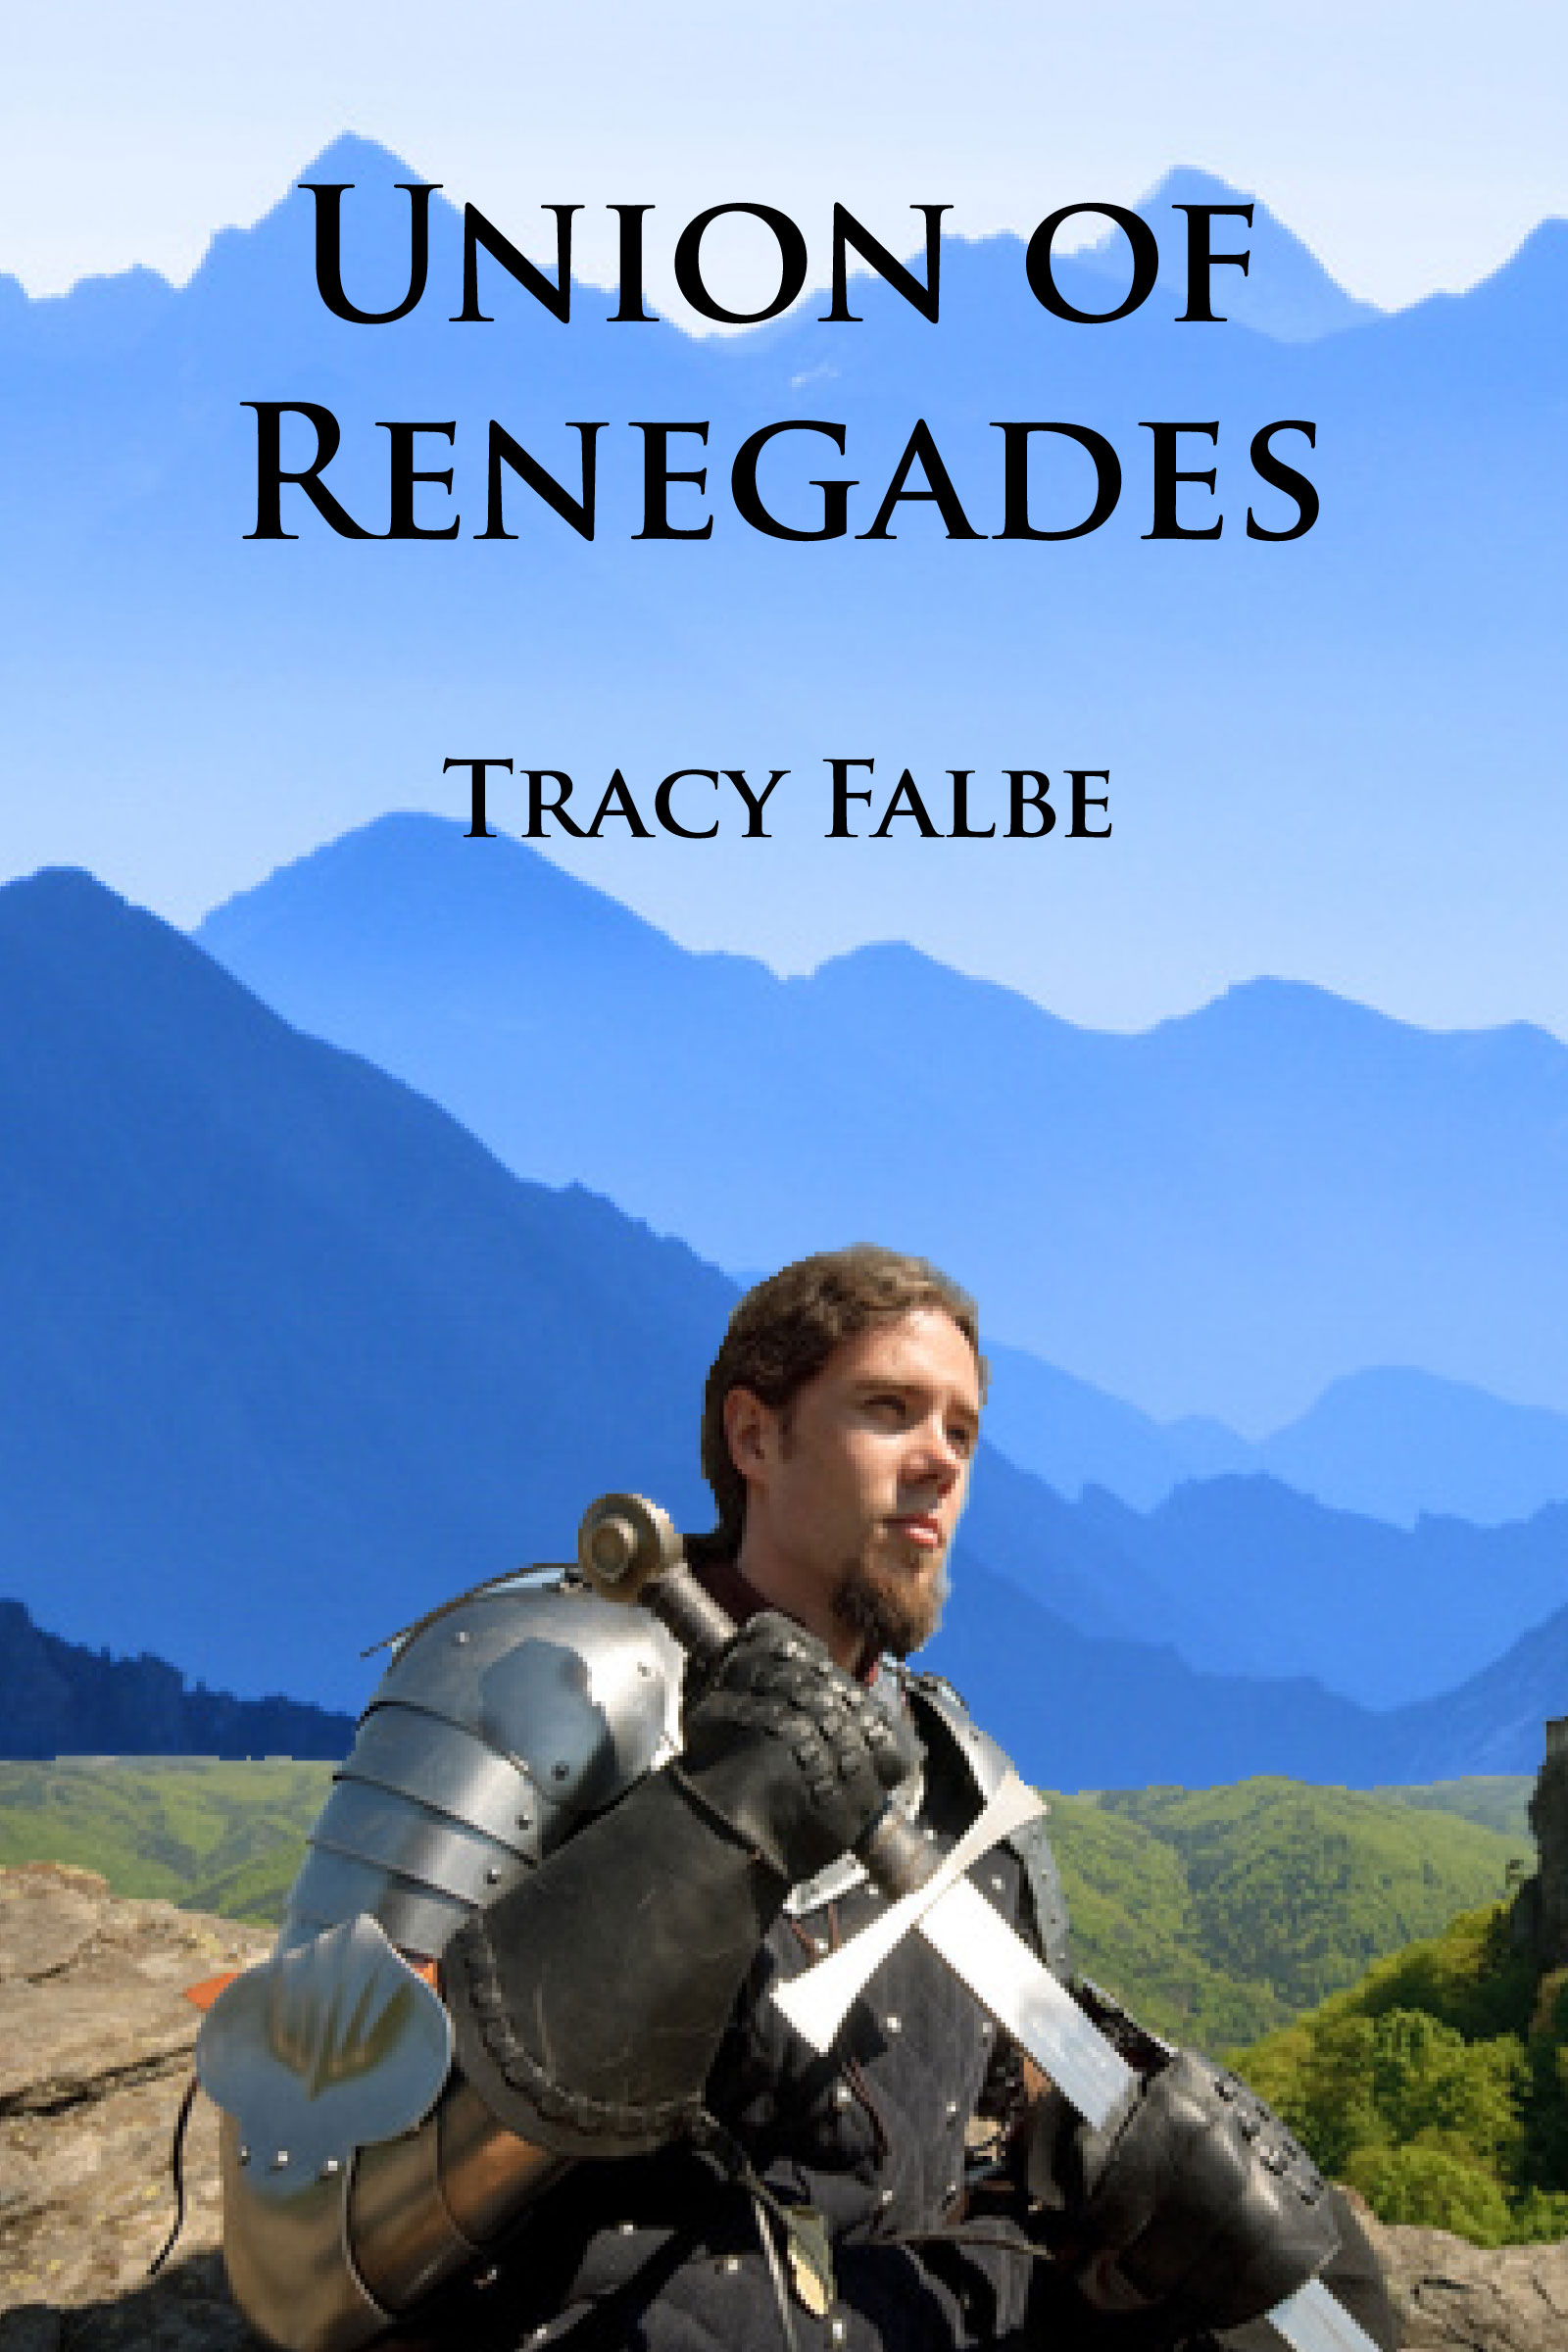 Union of Renegades a free fantasy ebook in the UK